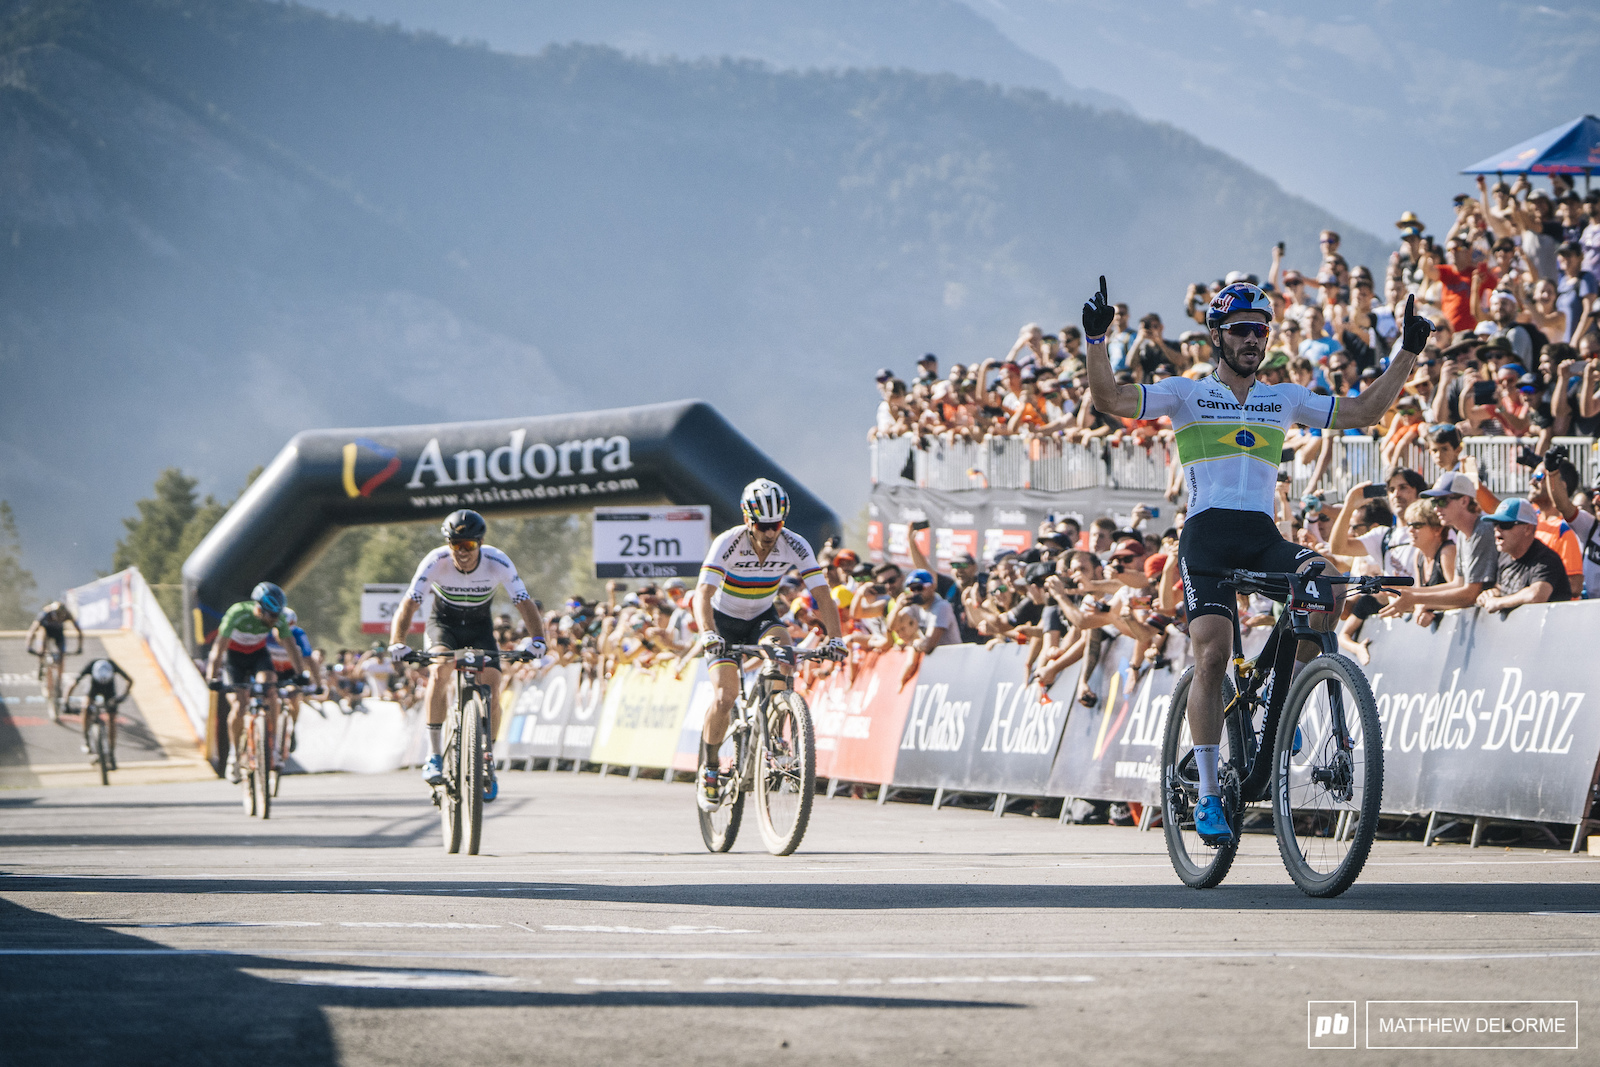 Avancini takes his second win in Andorra this one more commanding than the last.